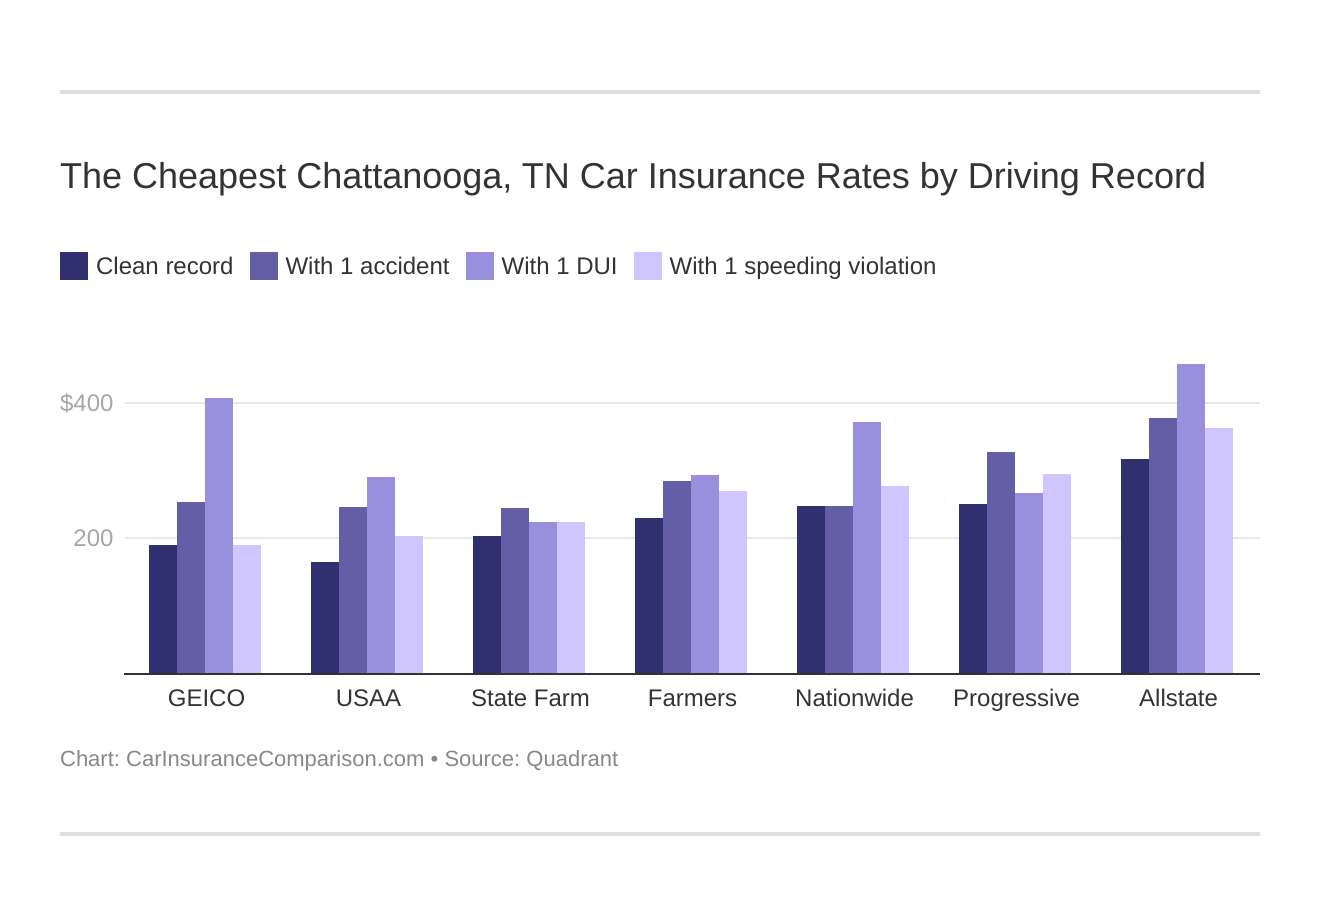 The Cheapest Chattanooga, TN Car Insurance Rates by Driving Record